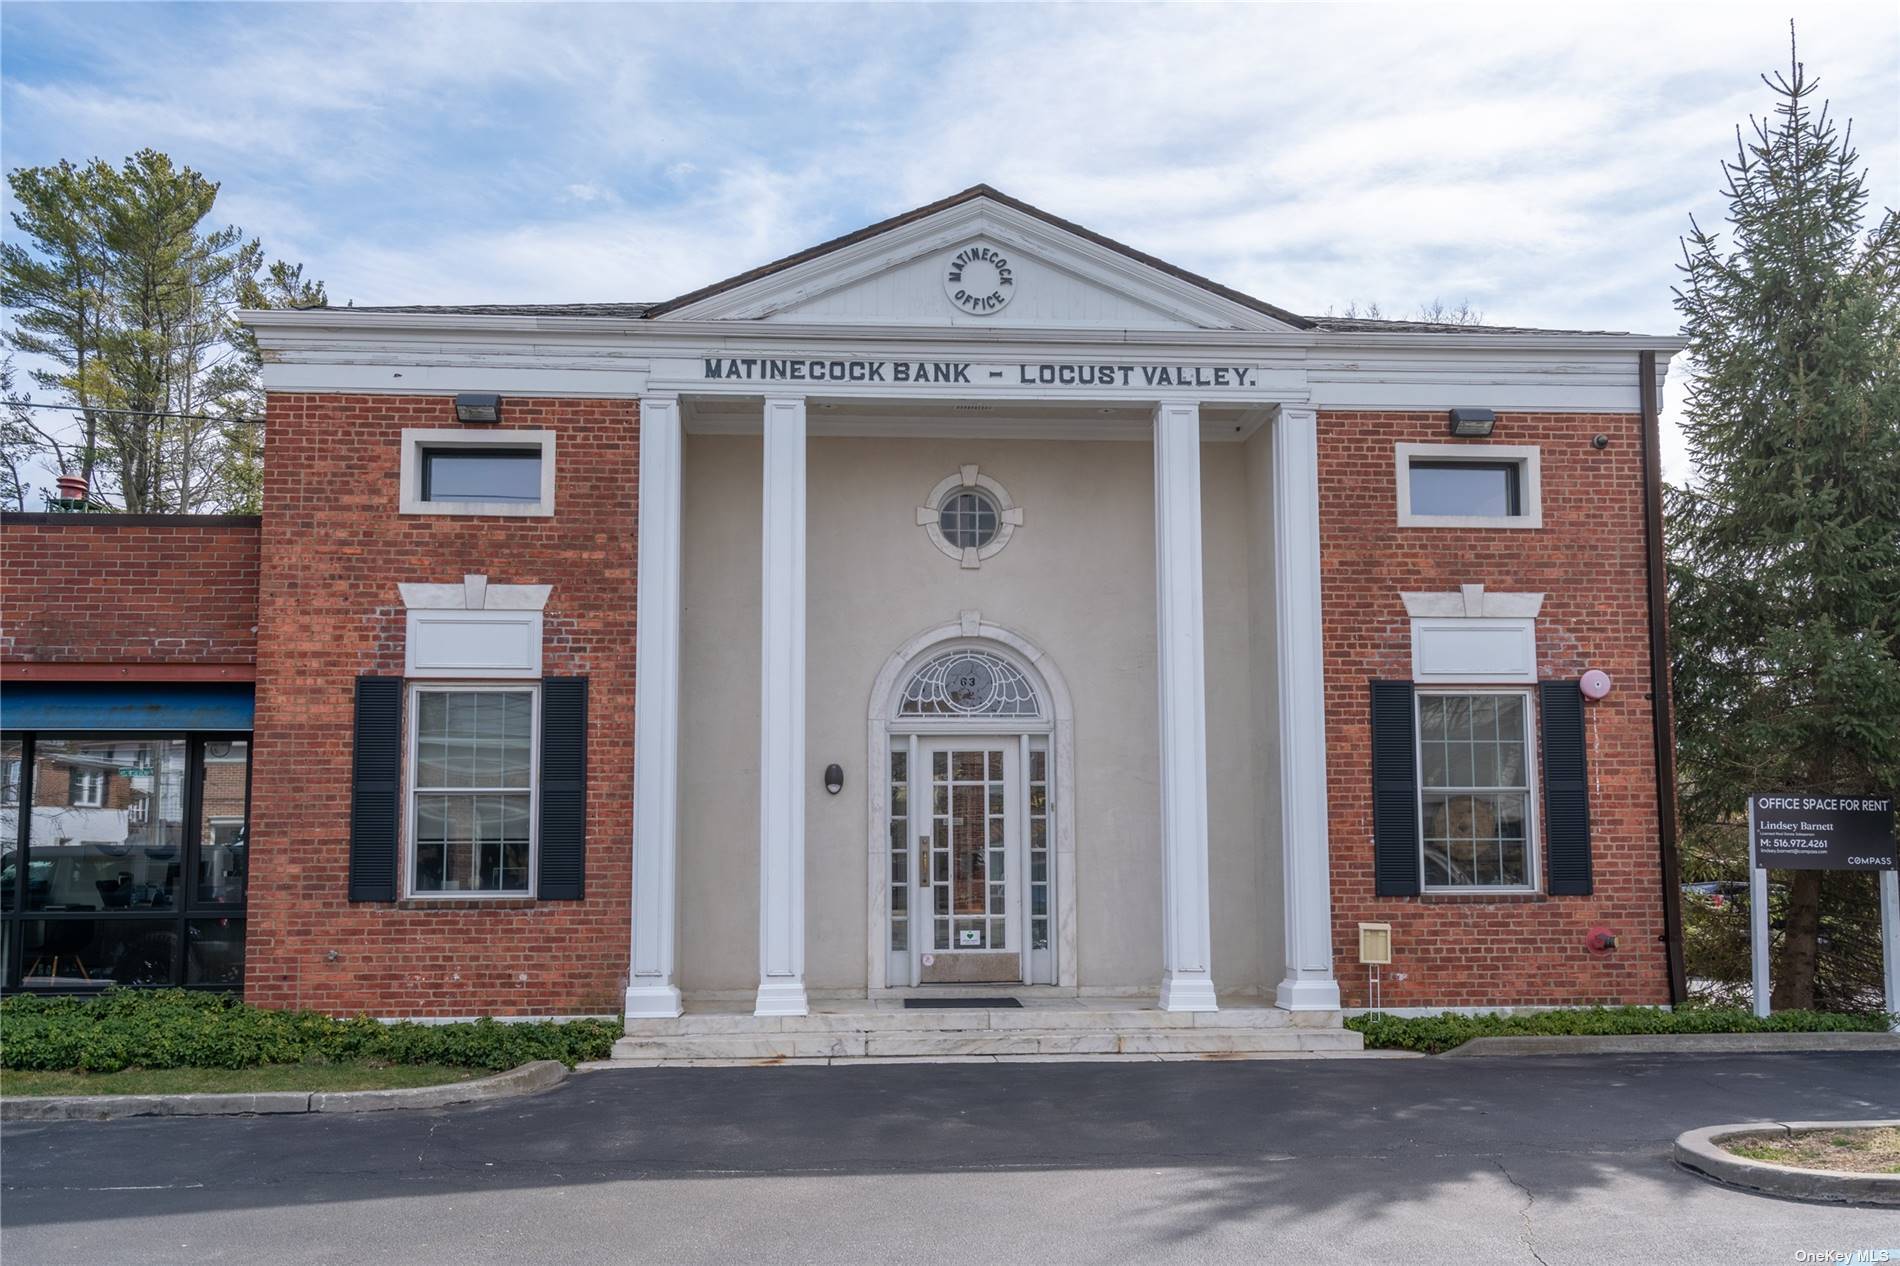 The iconic Locust Valley Bank Building, now available for sale.